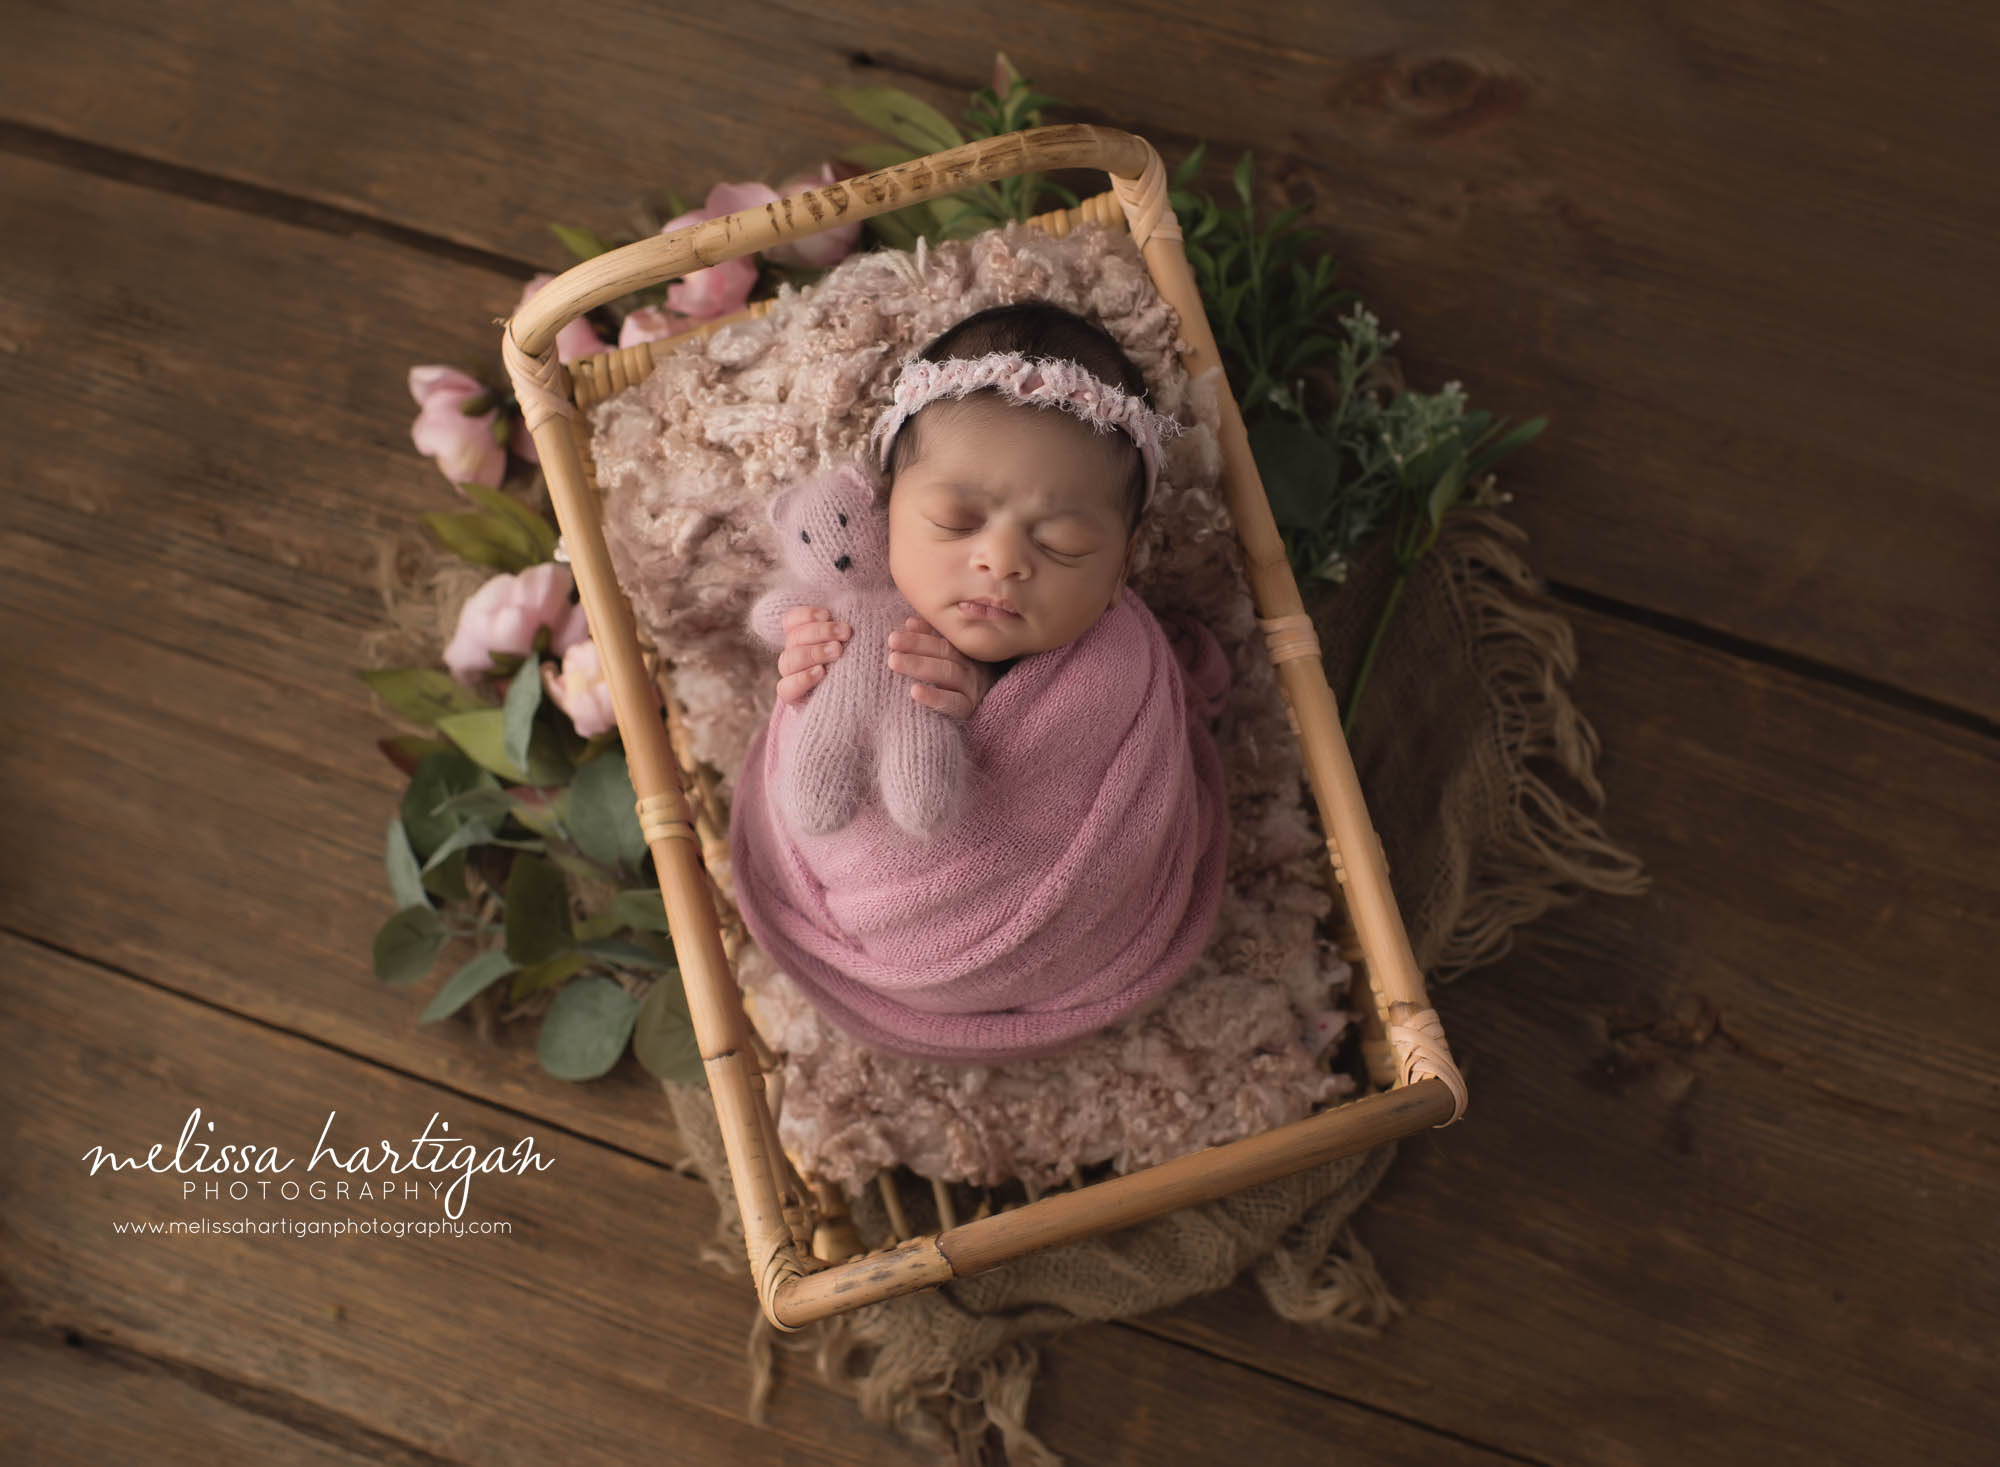 baby girl wrappe din pink posed in basket with flowers and greenery